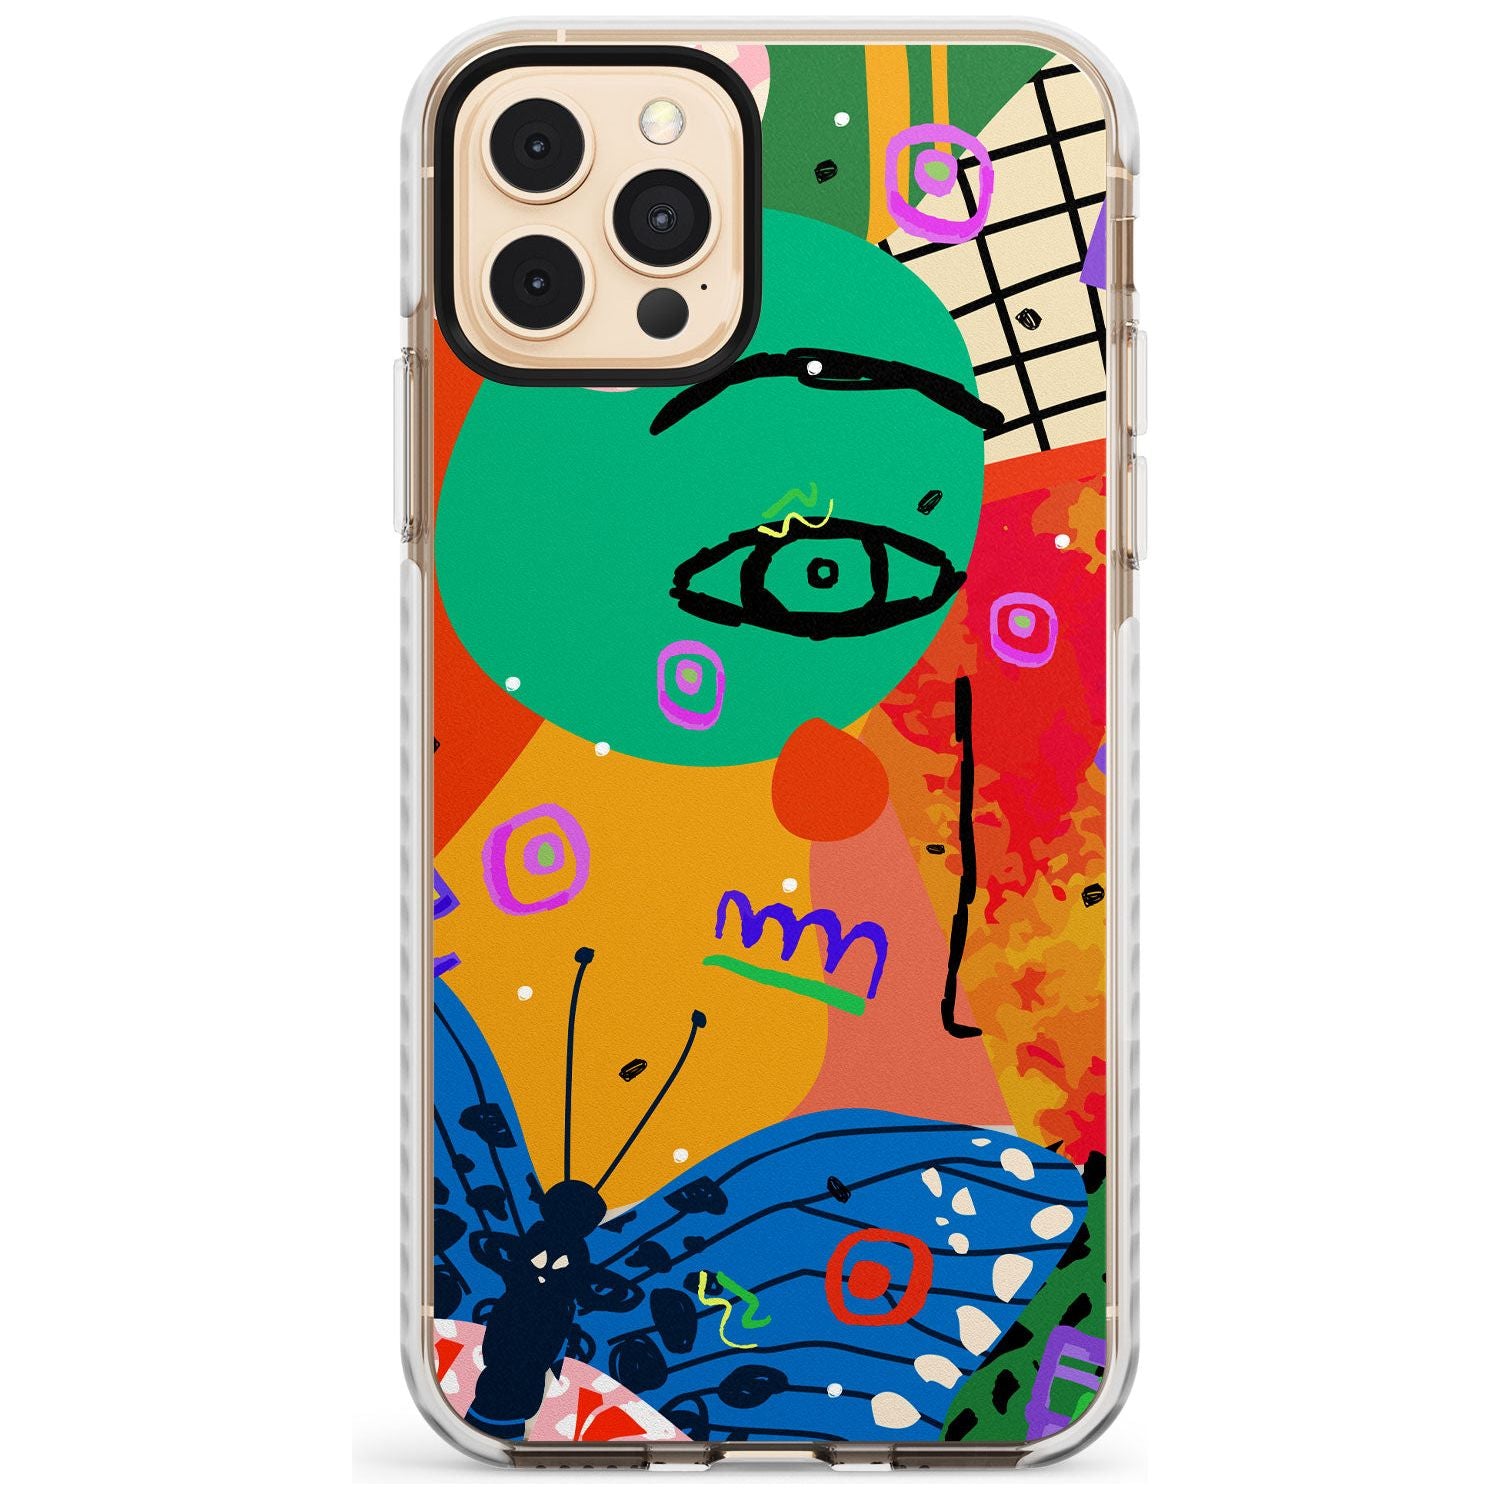 Abstract Butterfly Slim TPU Phone Case for iPhone 11 Pro Max